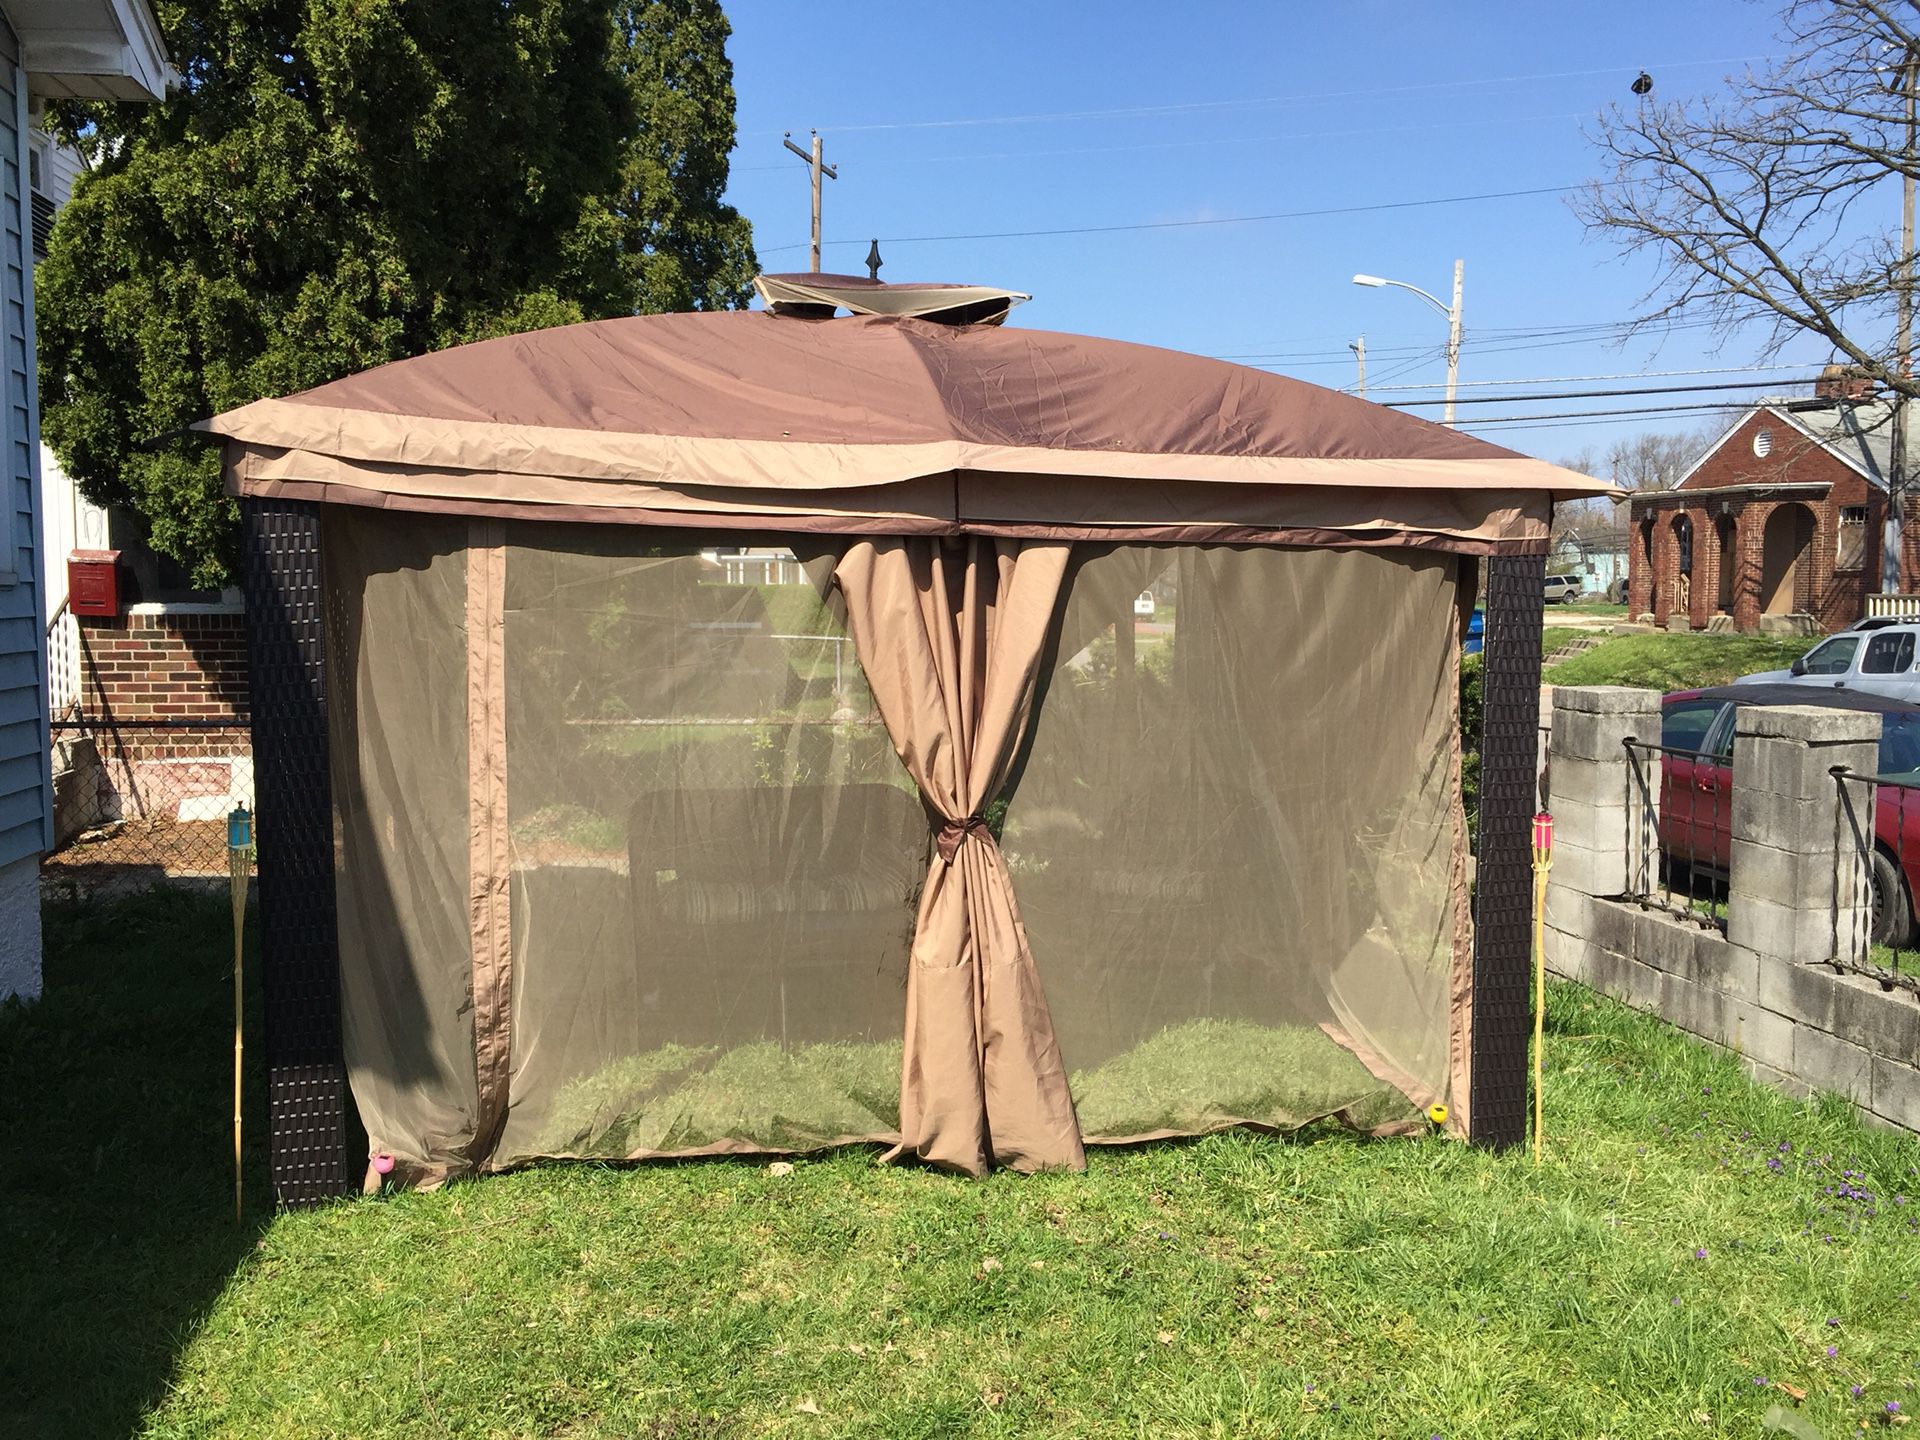 Way to start your holiday with family under this big beautiful canopy tent